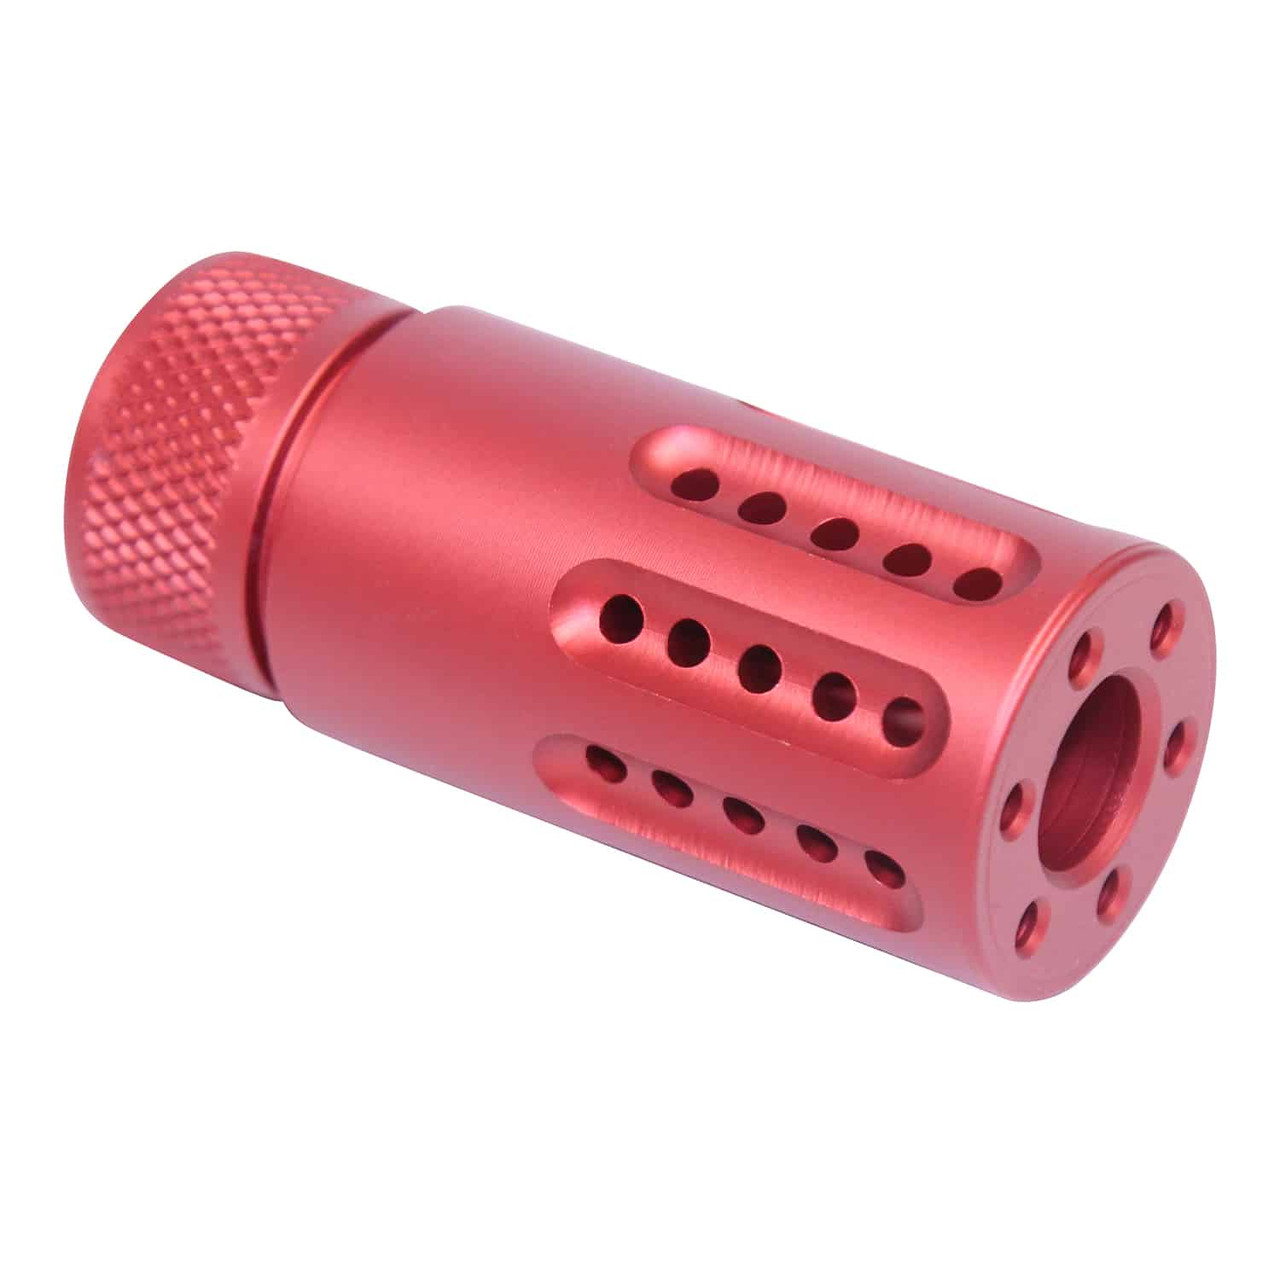 Guntec USA 1326-MB-P-S-9-RED Micro Slip Over Barrel Shroud With Multi Port Muzzle Brake (9mm) (Anodized Red)